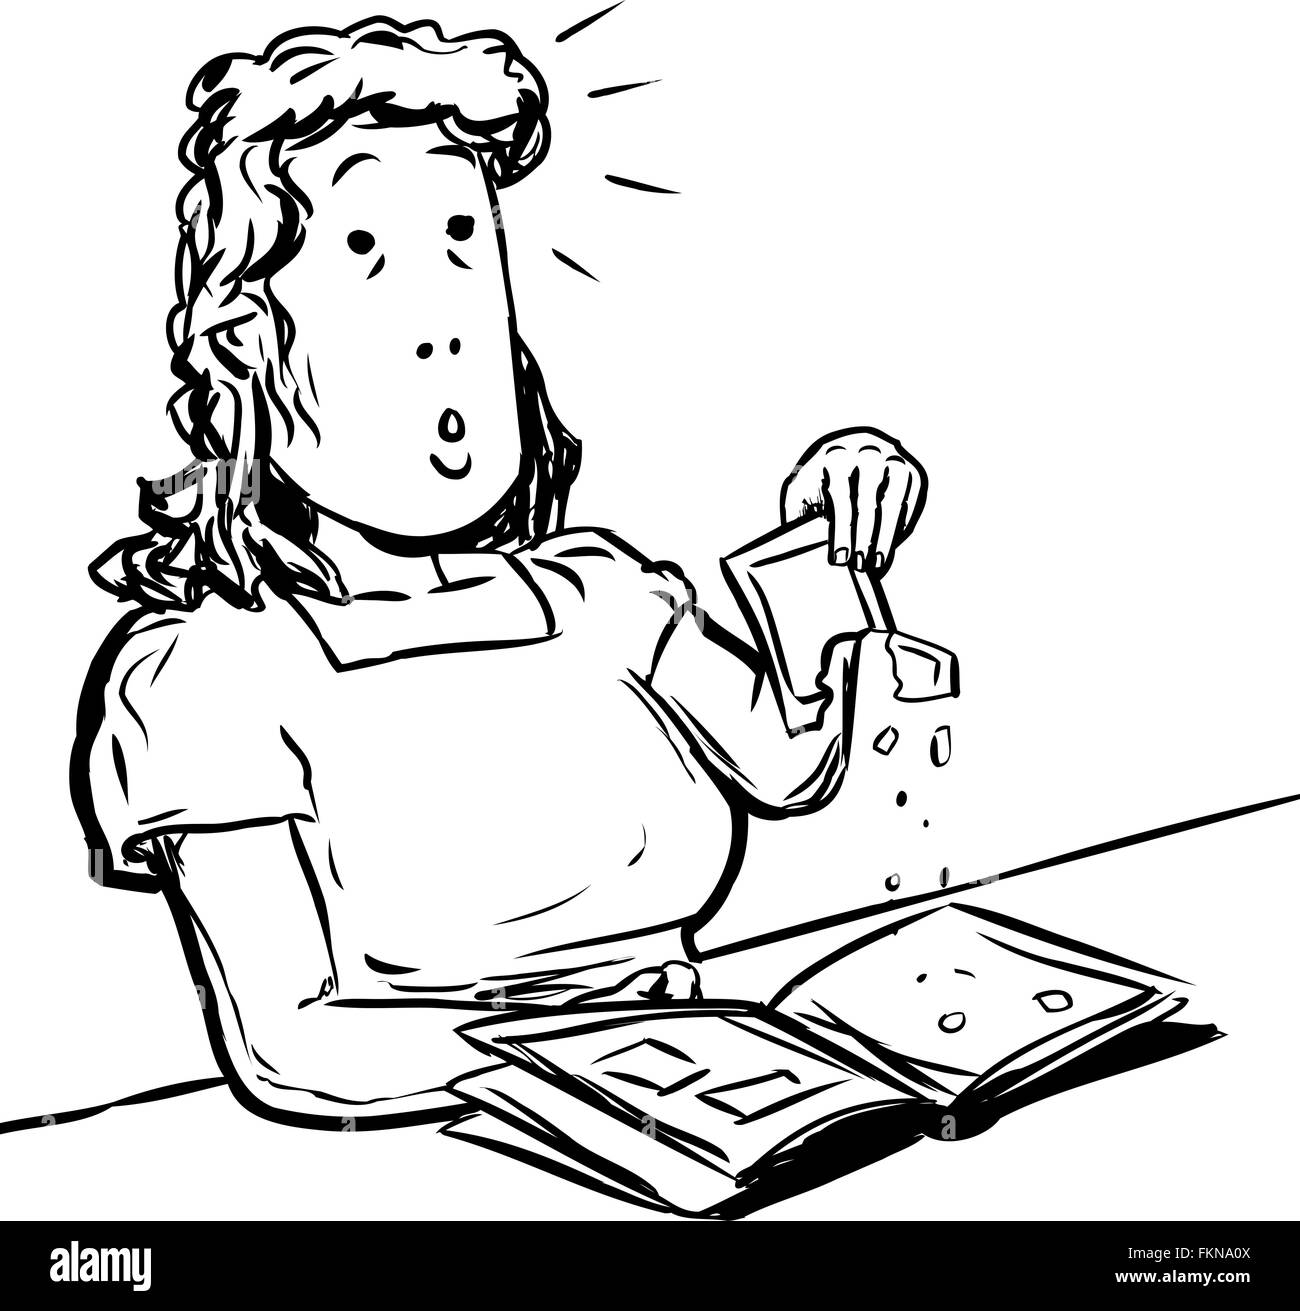 Cartoon outlined doodle sketch of middle aged adult female holding crumbling damaged photo over photo album Stock Photo